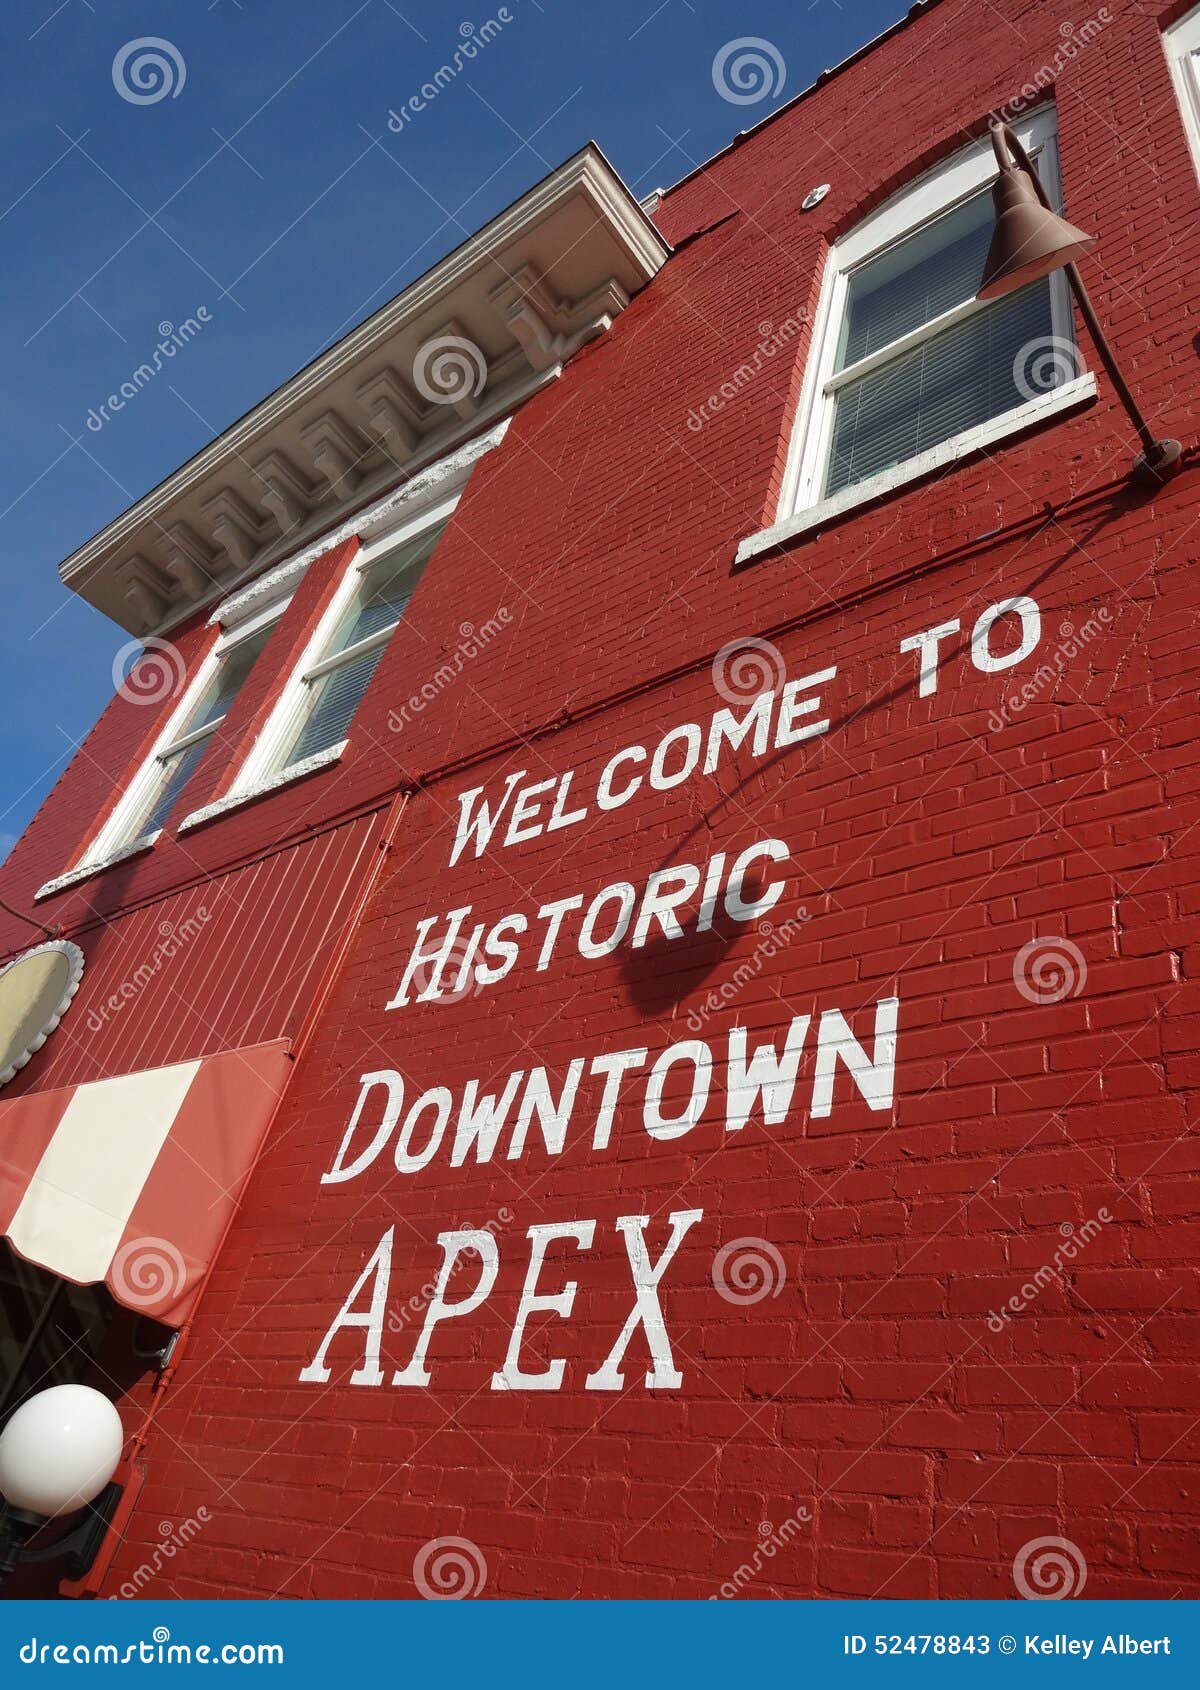 welcome to historic downtown apex, north carolina